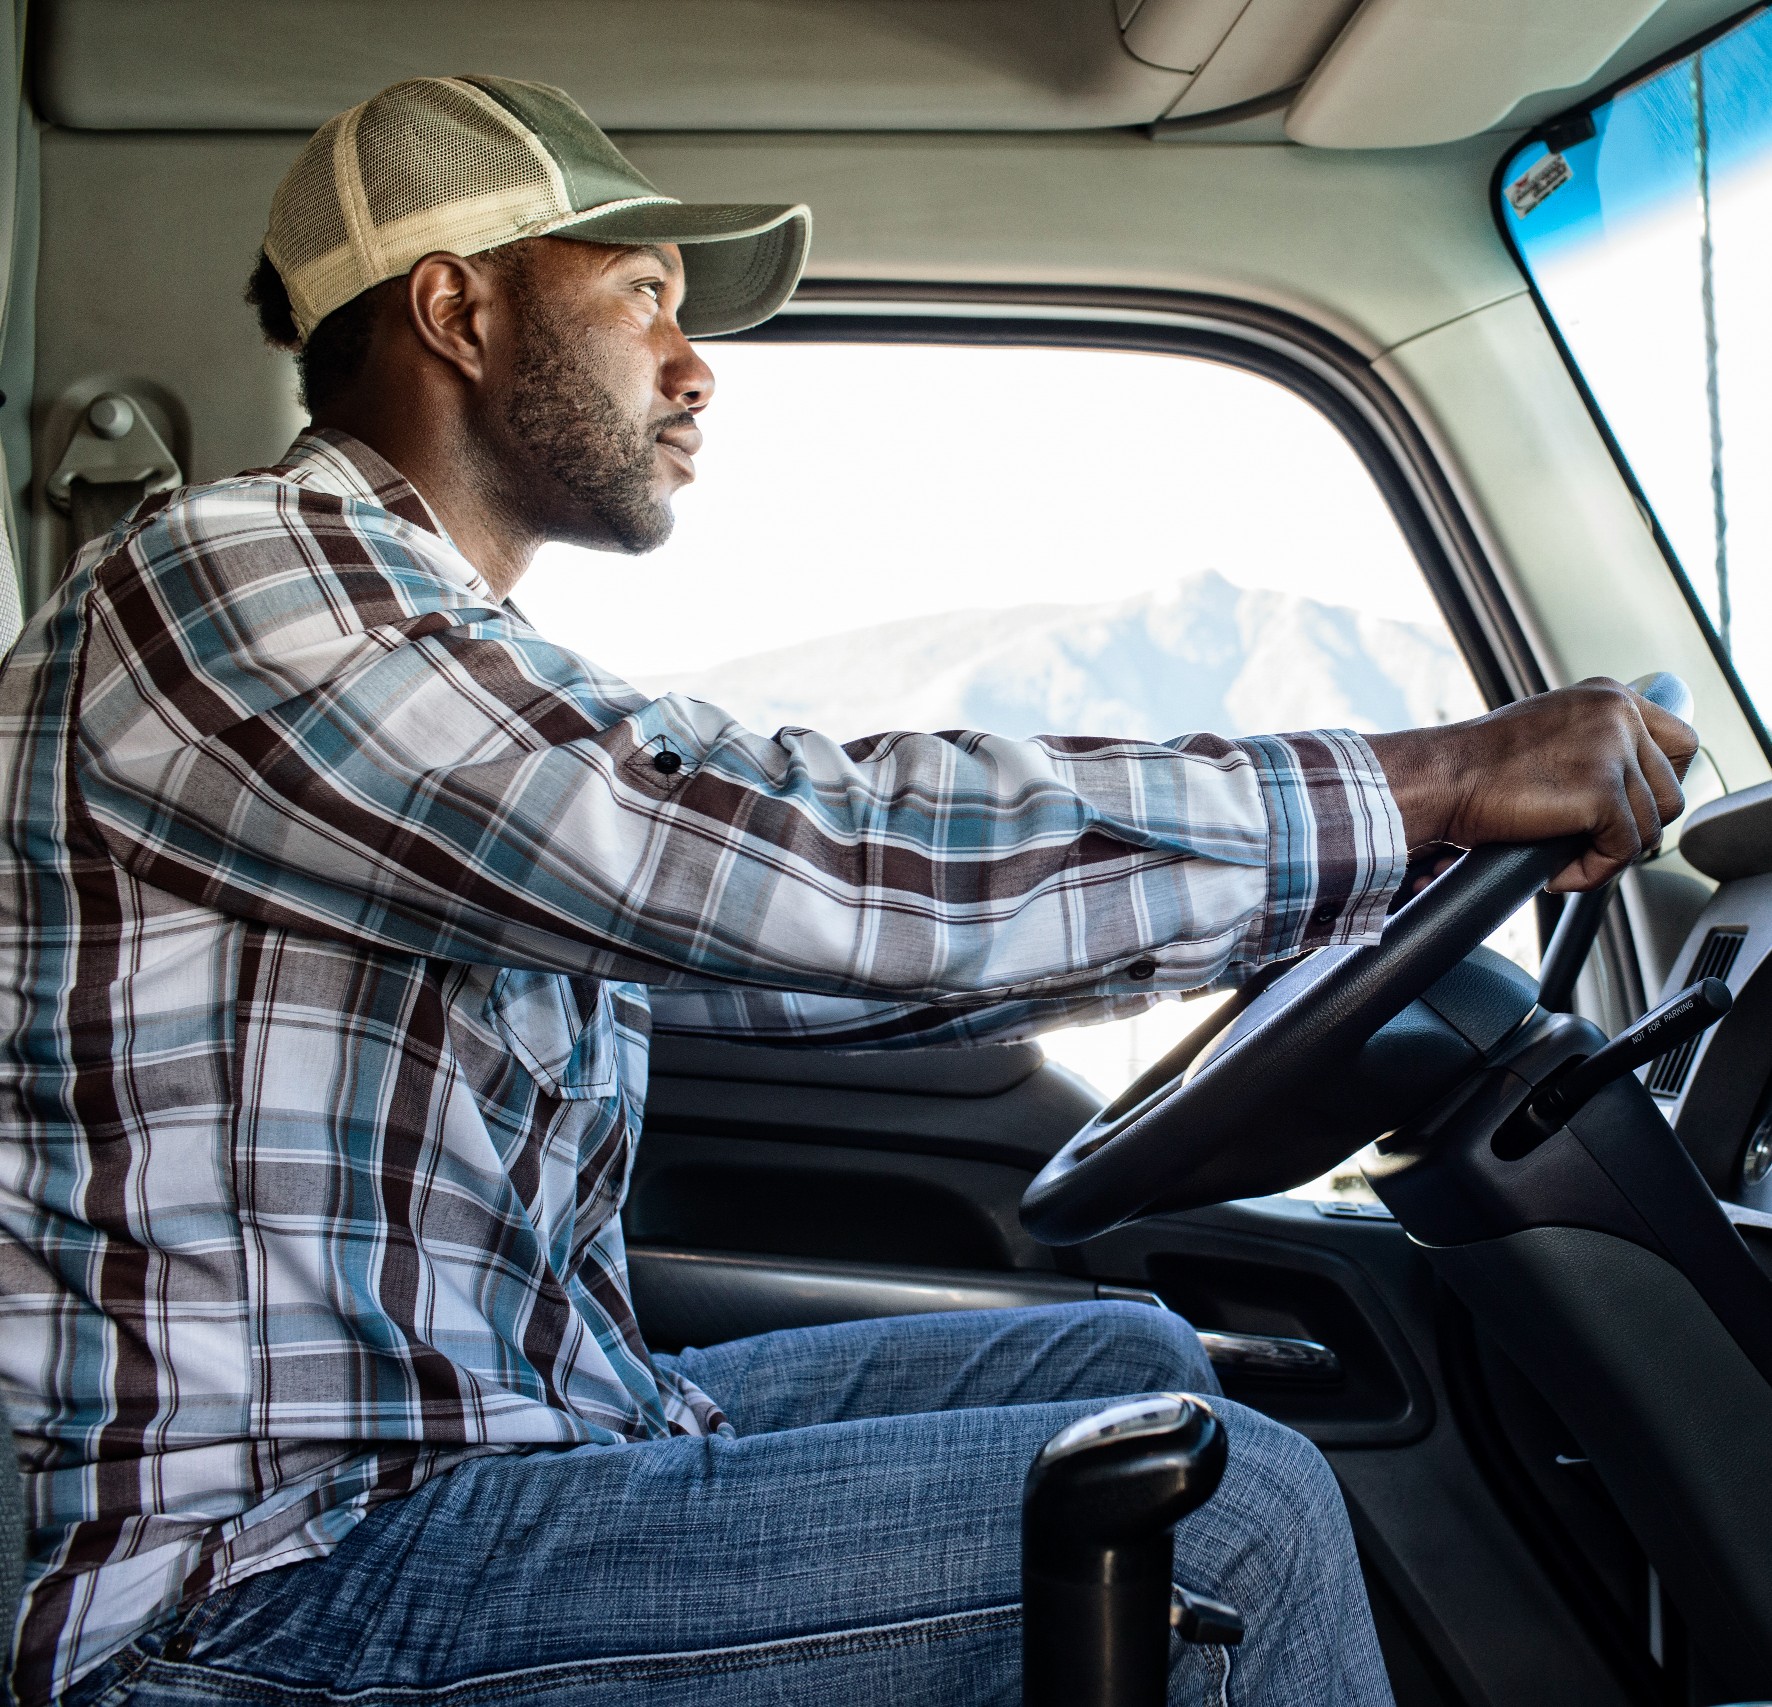 Black man truck driver in the cab of his commercial truck